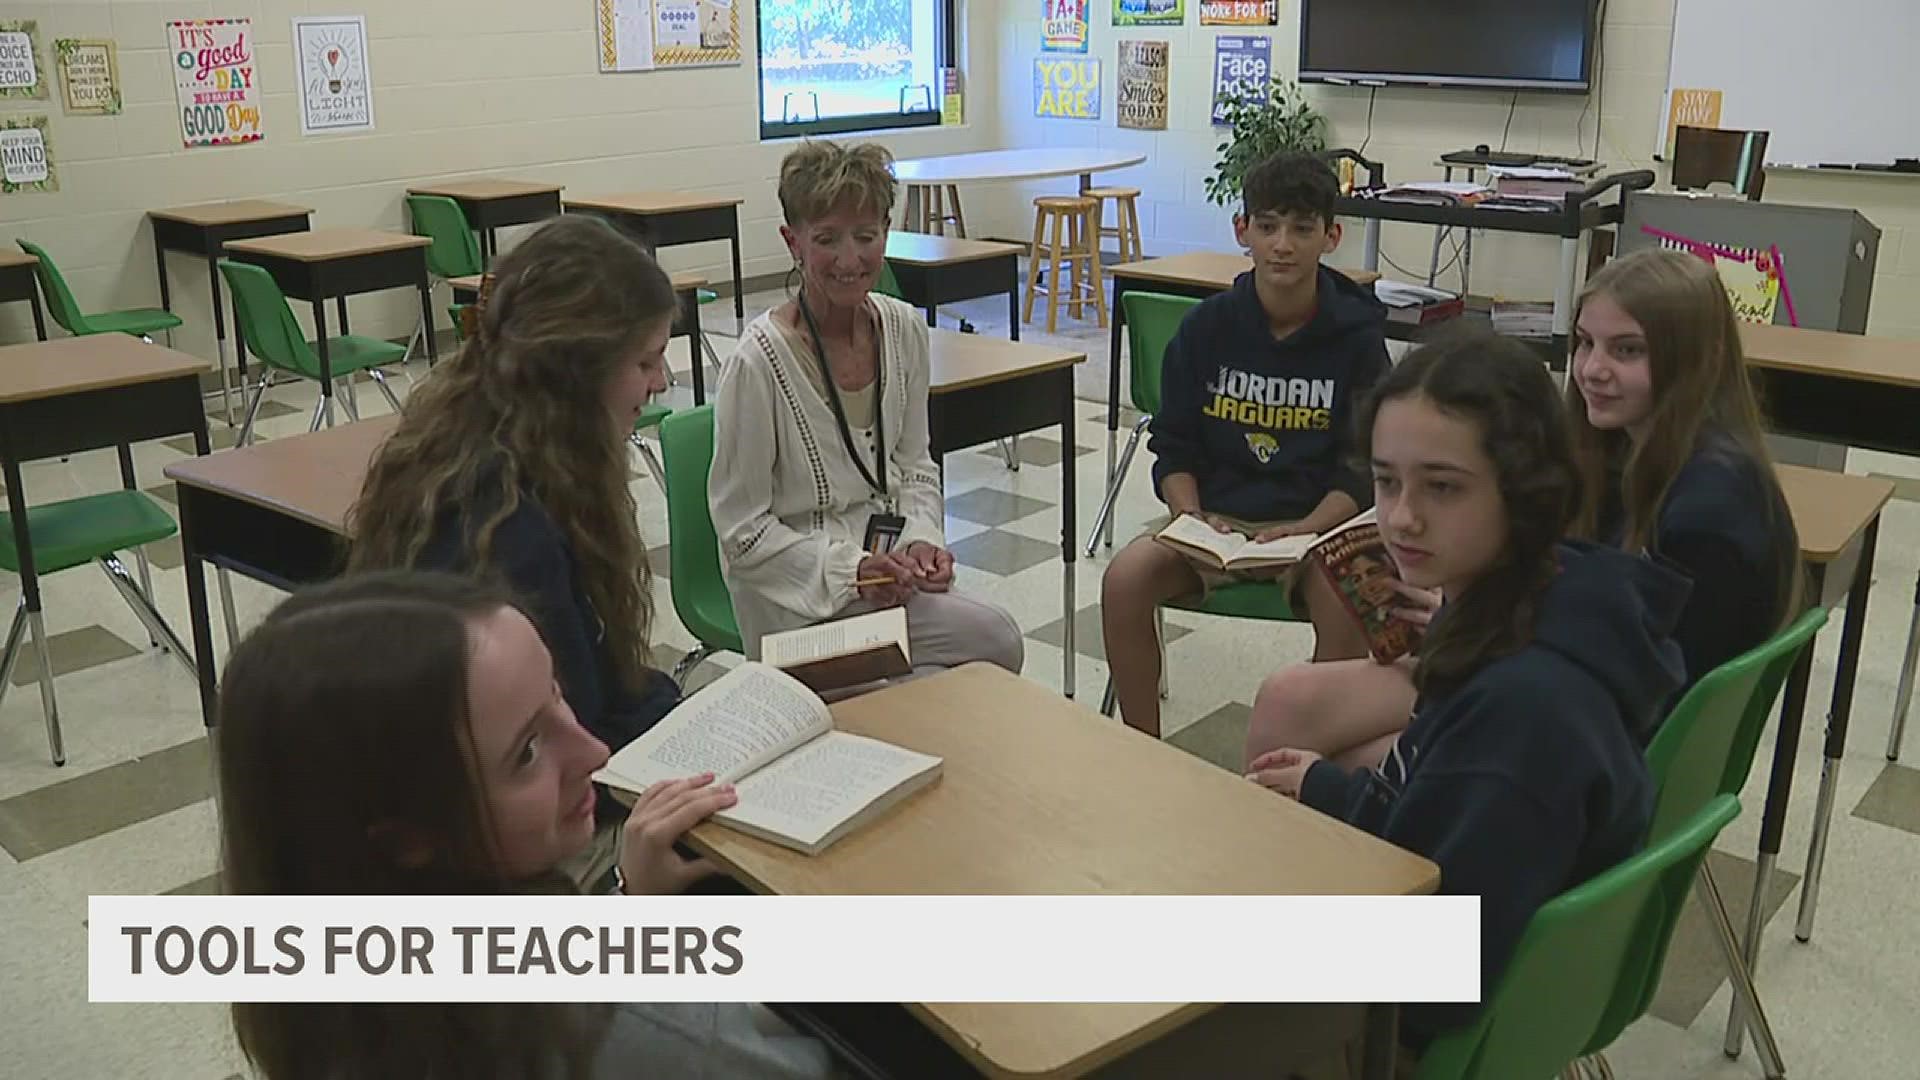 Seventh-grade teacher Debbie Marlier was awarded a $200 gift card that she plans to give back to her class with some end-of-year celebrations.